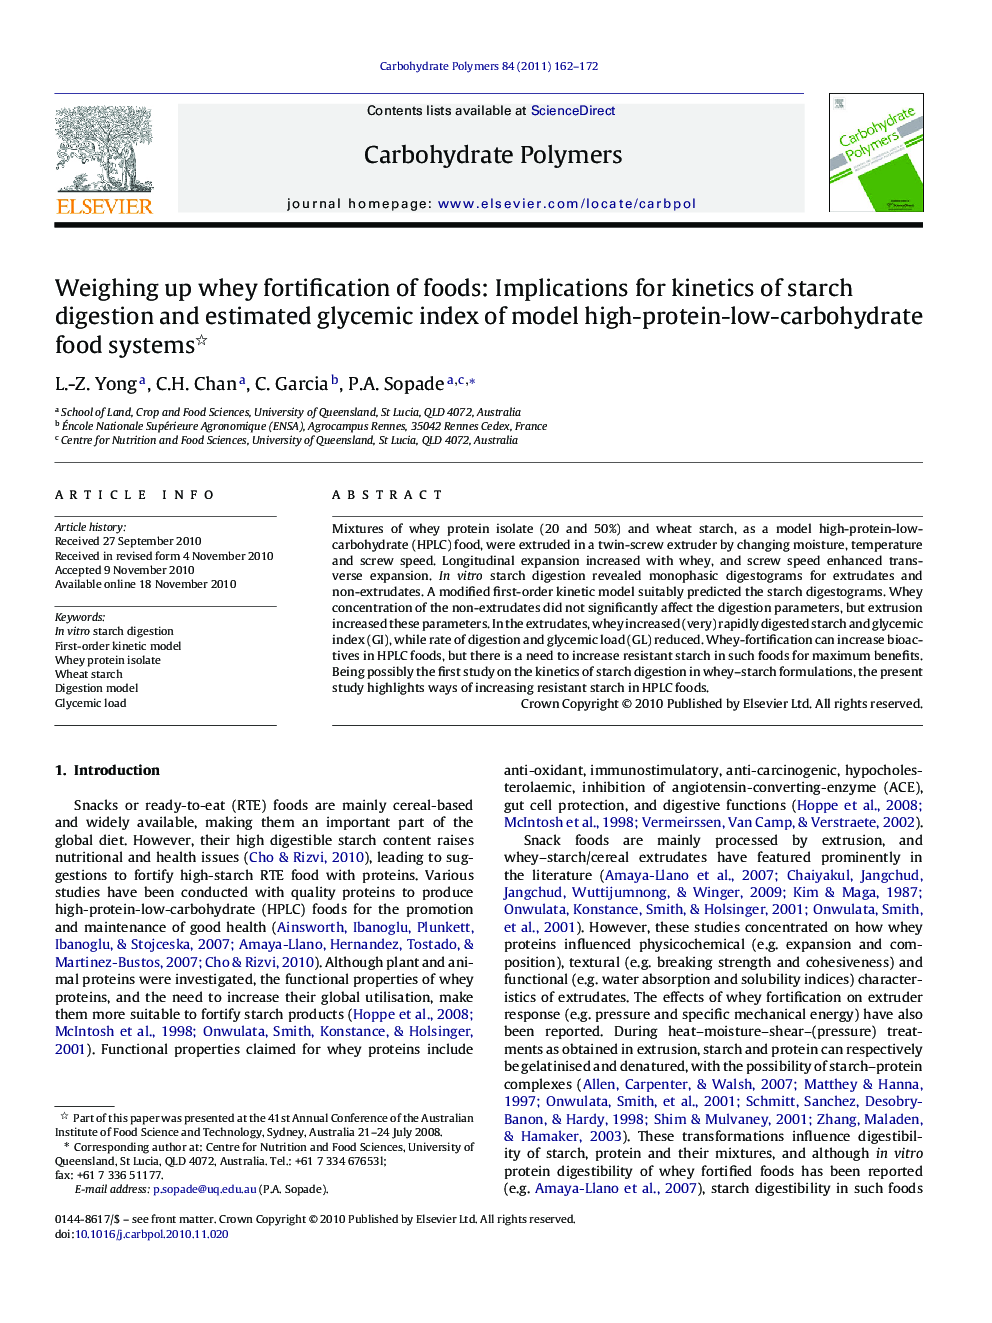 Weighing up whey fortification of foods: Implications for kinetics of starch digestion and estimated glycemic index of model high-protein-low-carbohydrate food systems